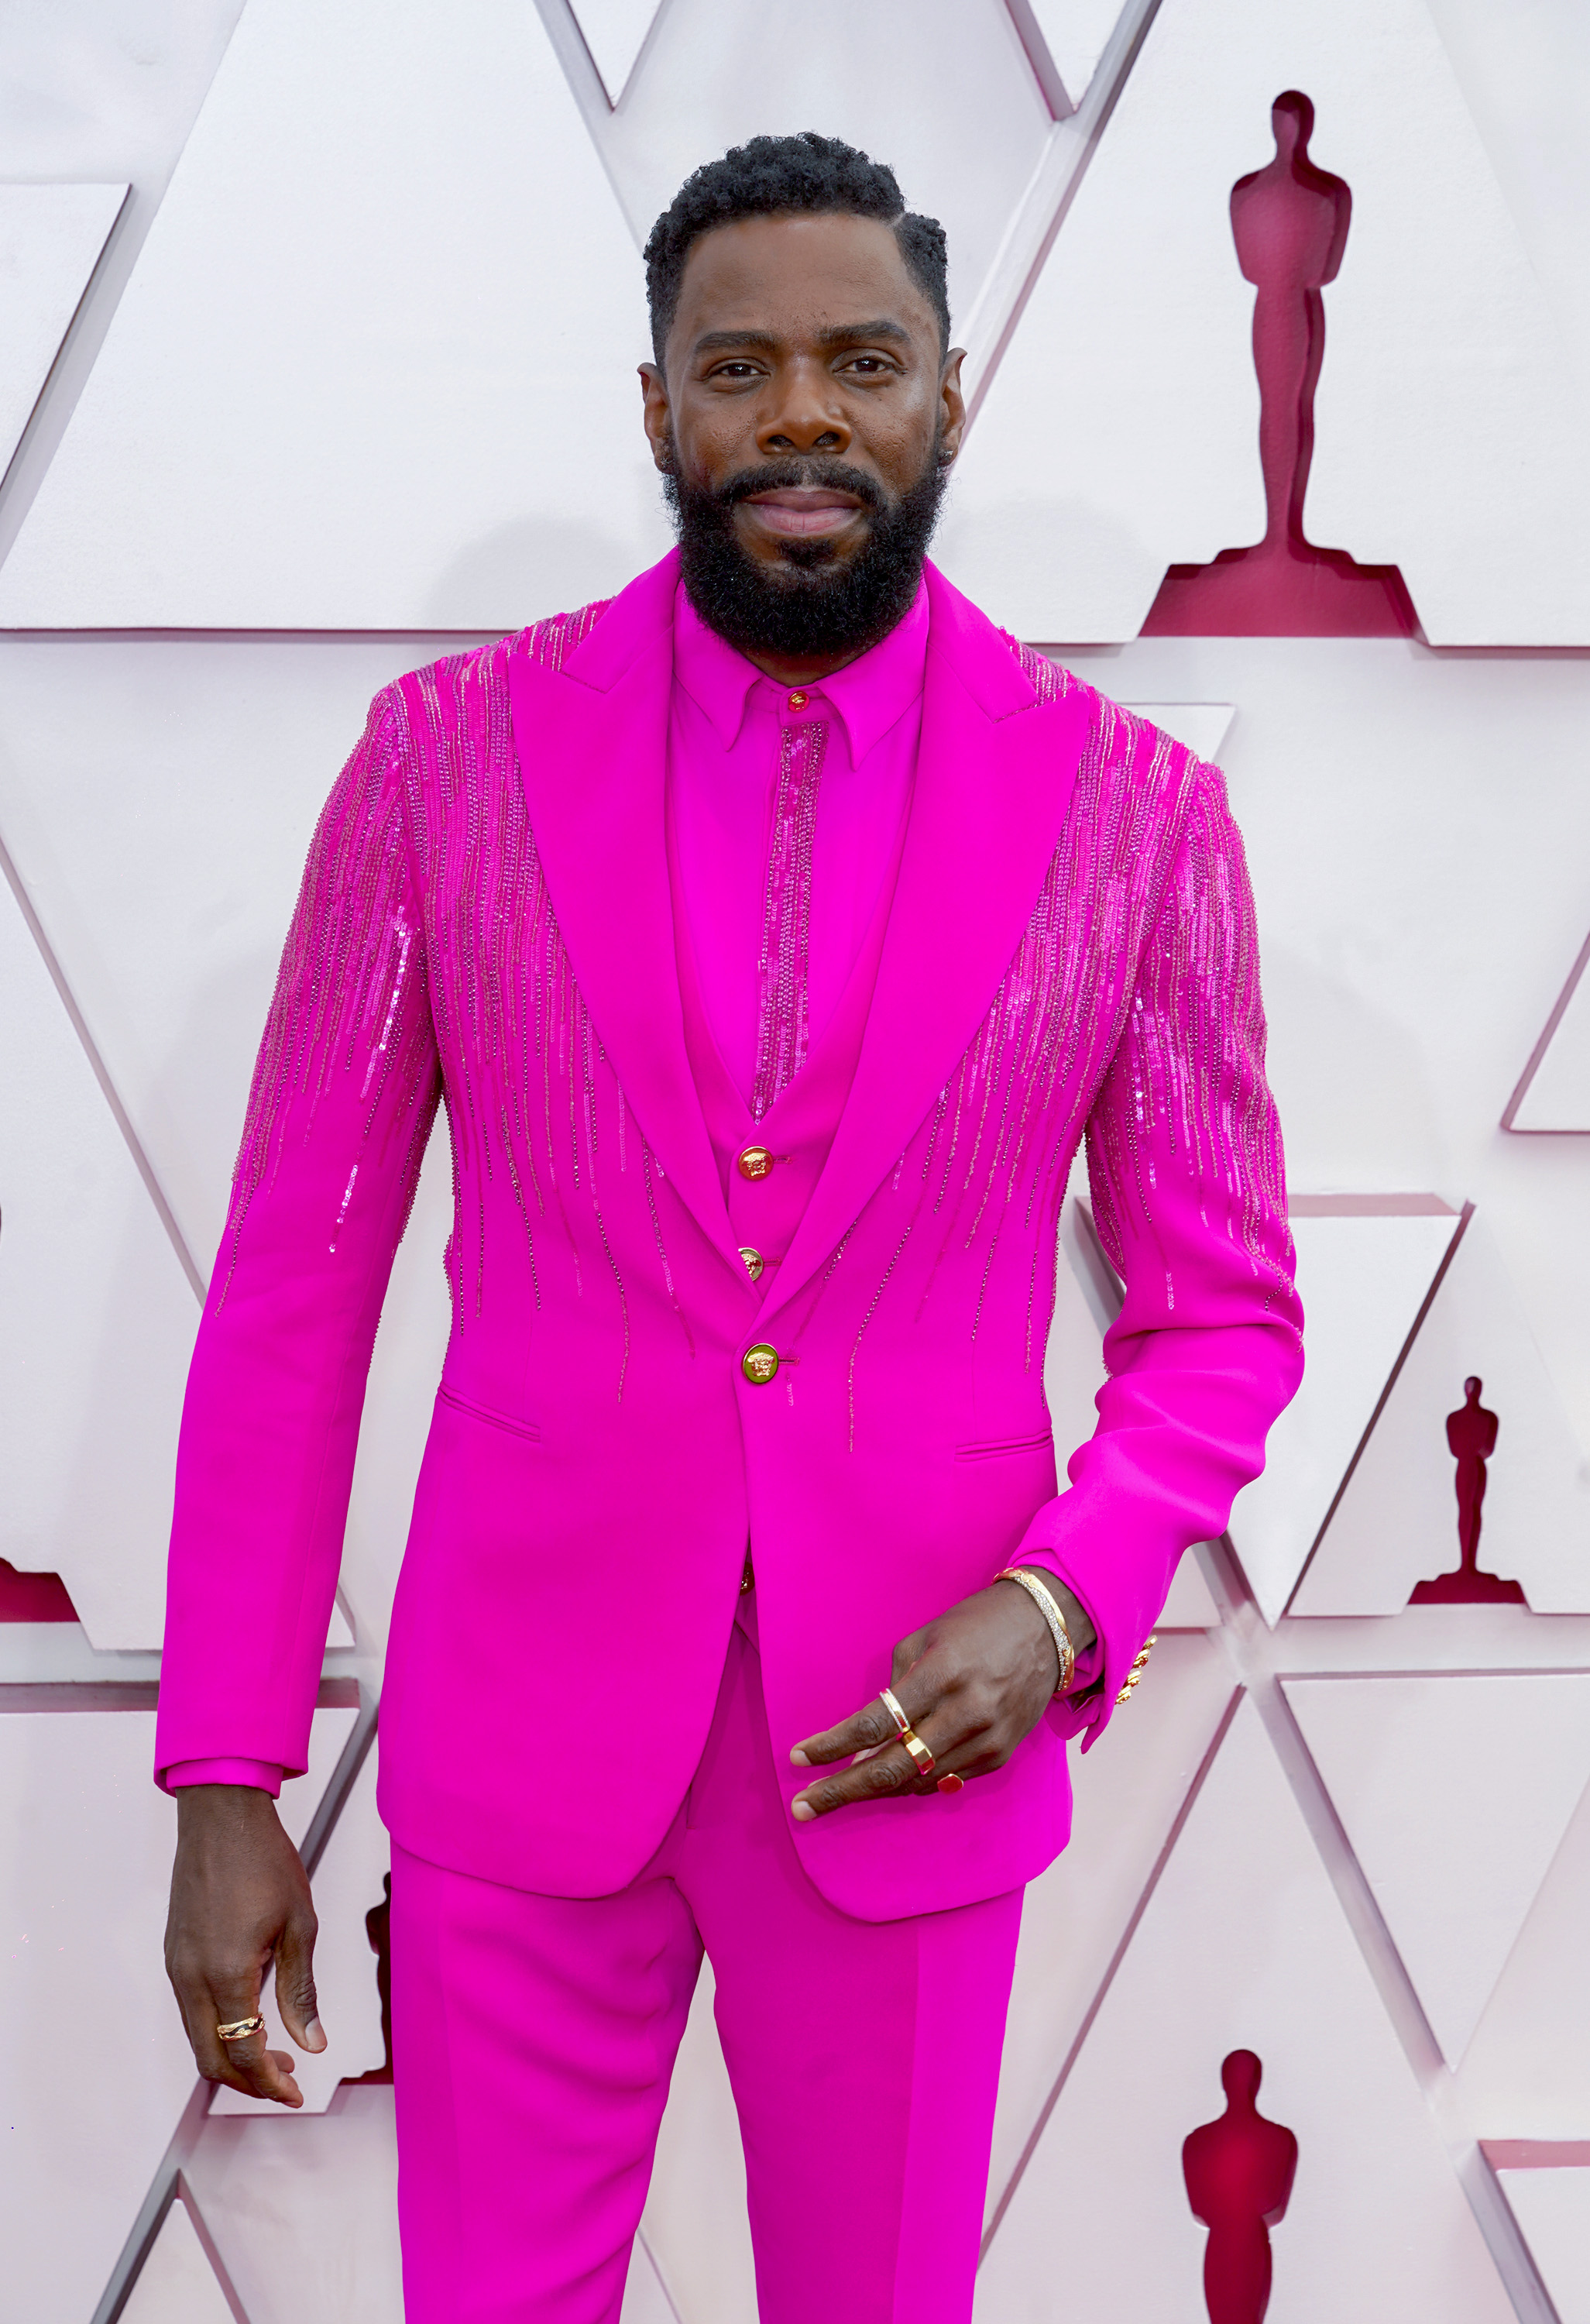 Colman Domingo's 2021 Oscars suit took 150 hours to embroider